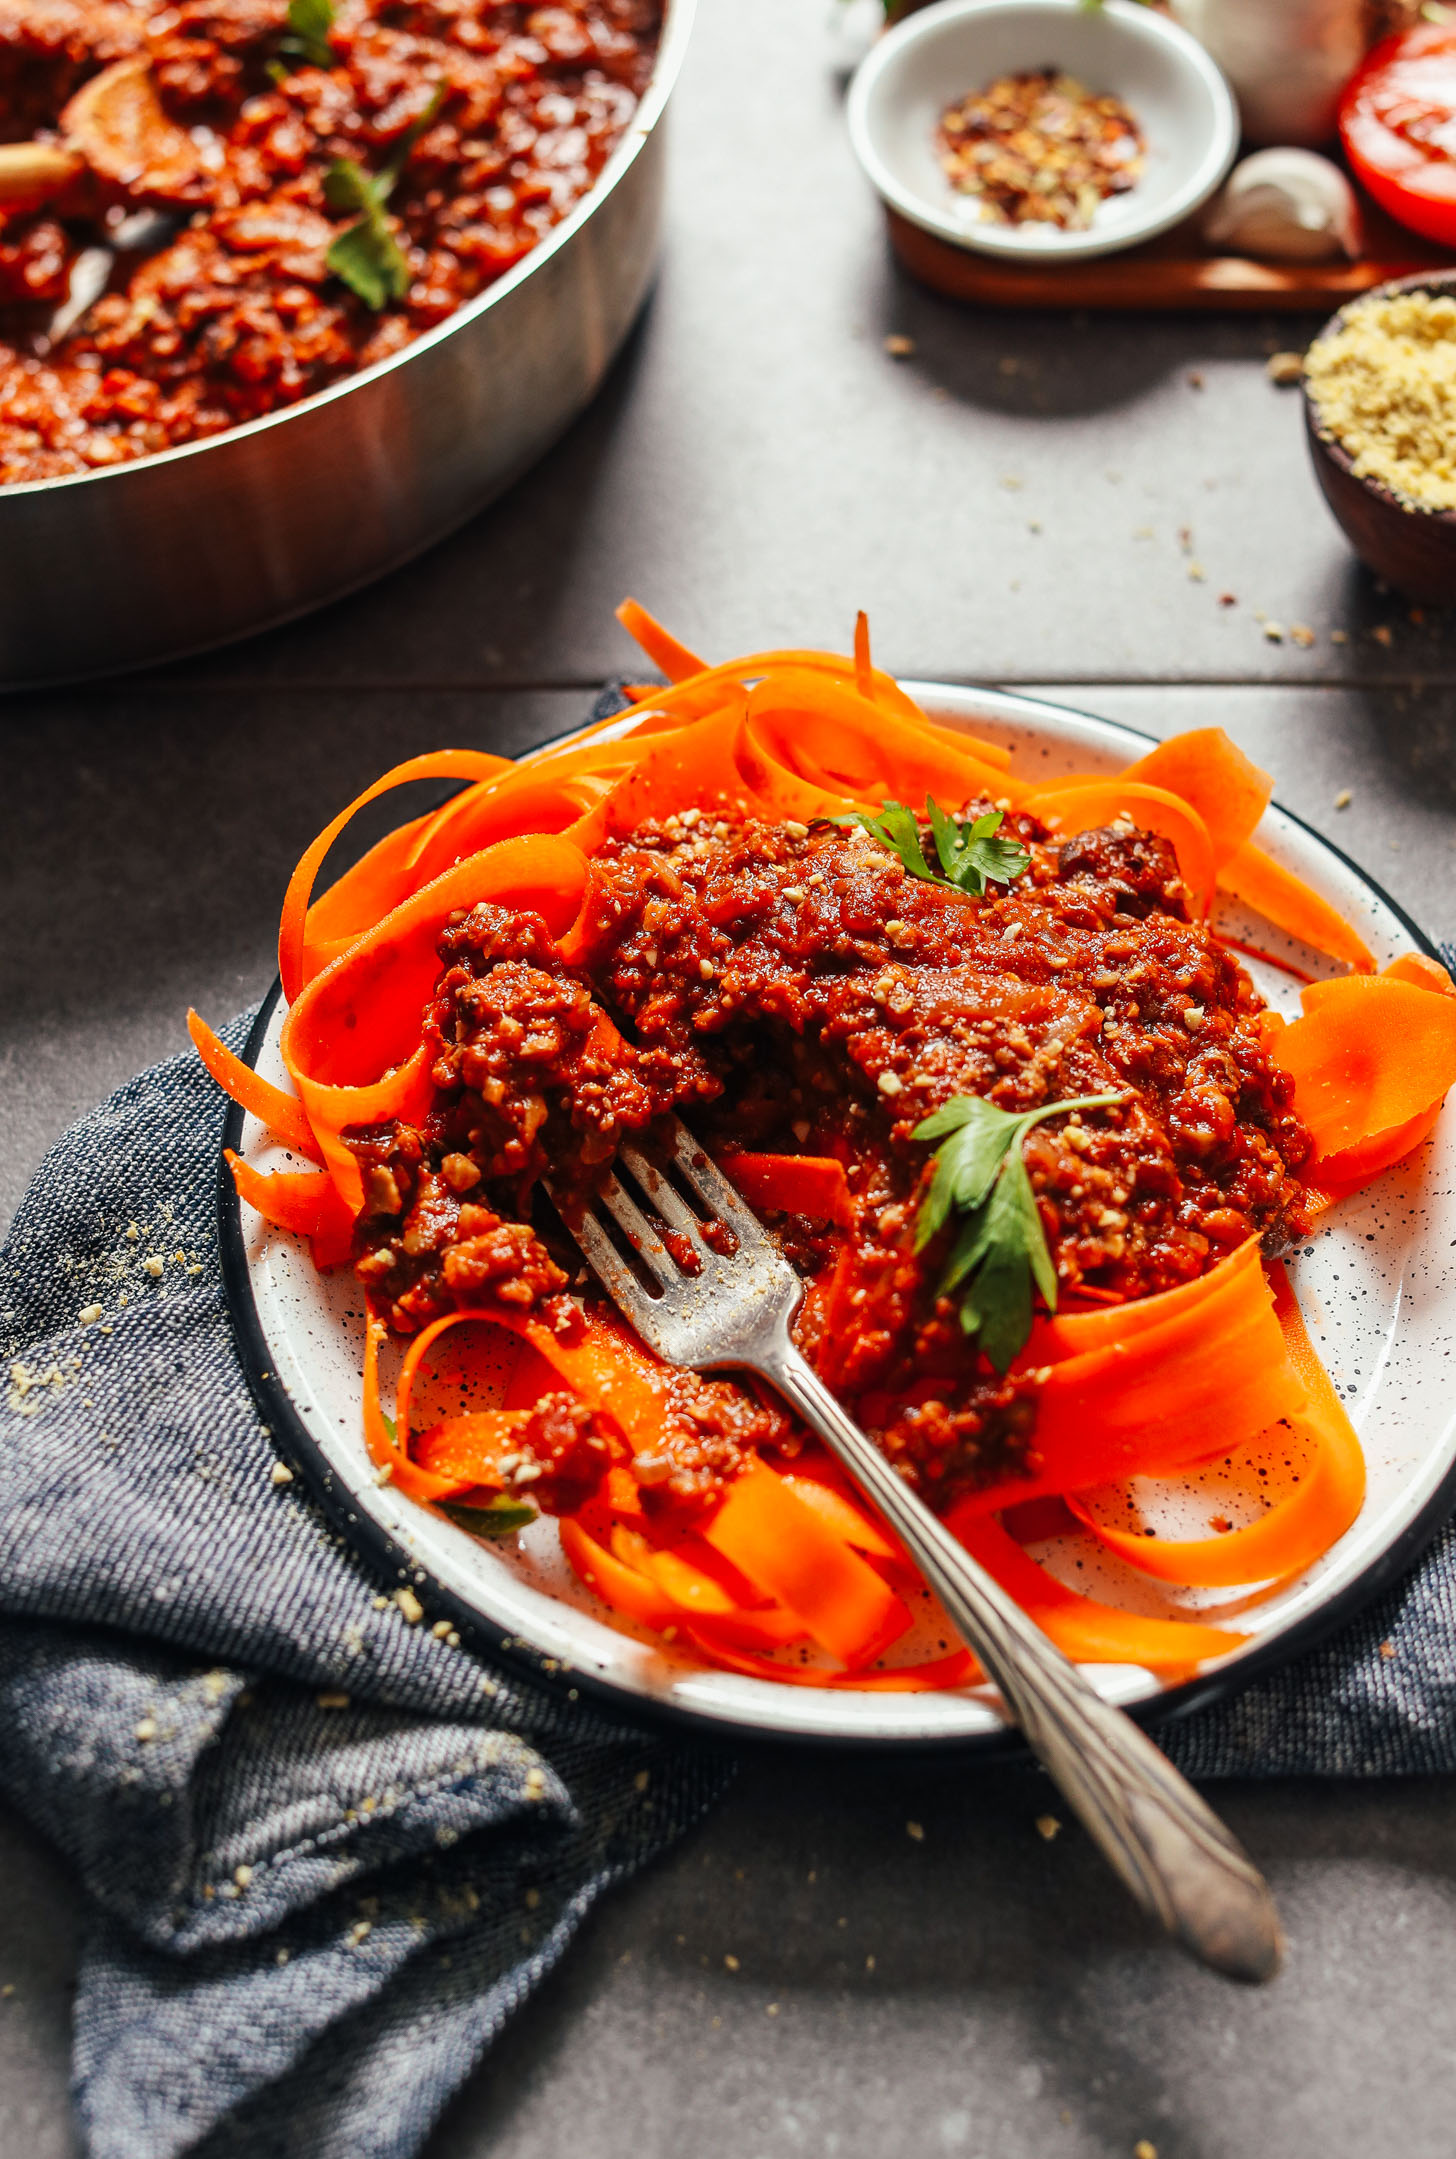 Image of tempeh bolognese over carrot noodles served on a white plate over a blue towel, garnished with parsley